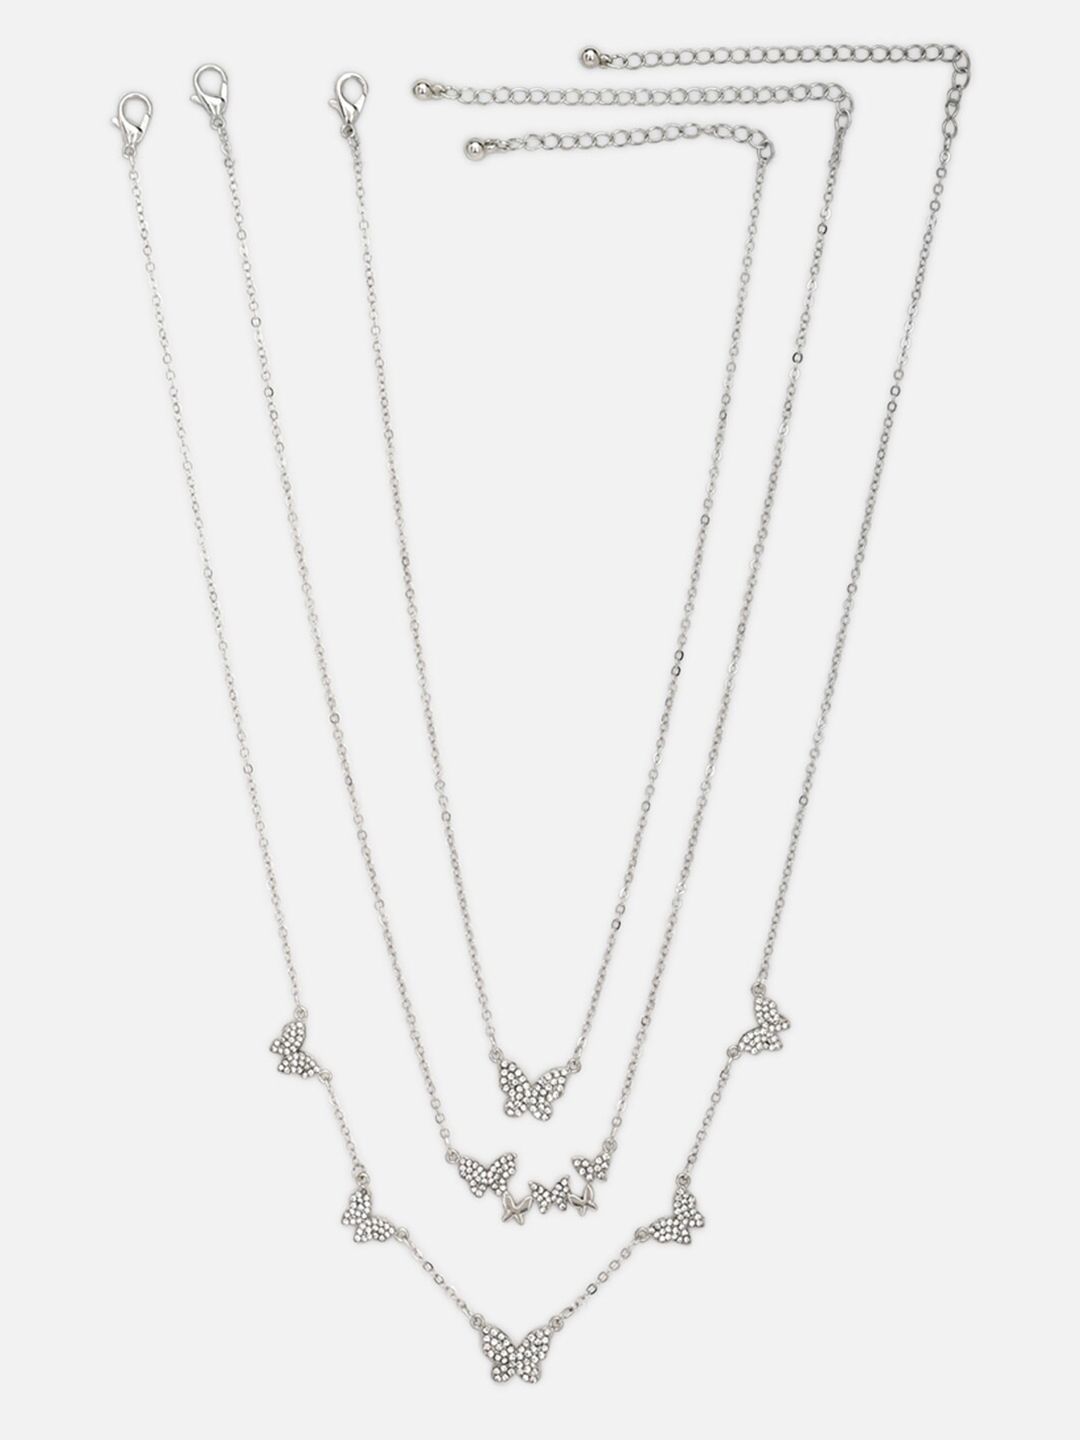 FOREVER 21 Set of 3 Silver-Toned Necklaces Price in India